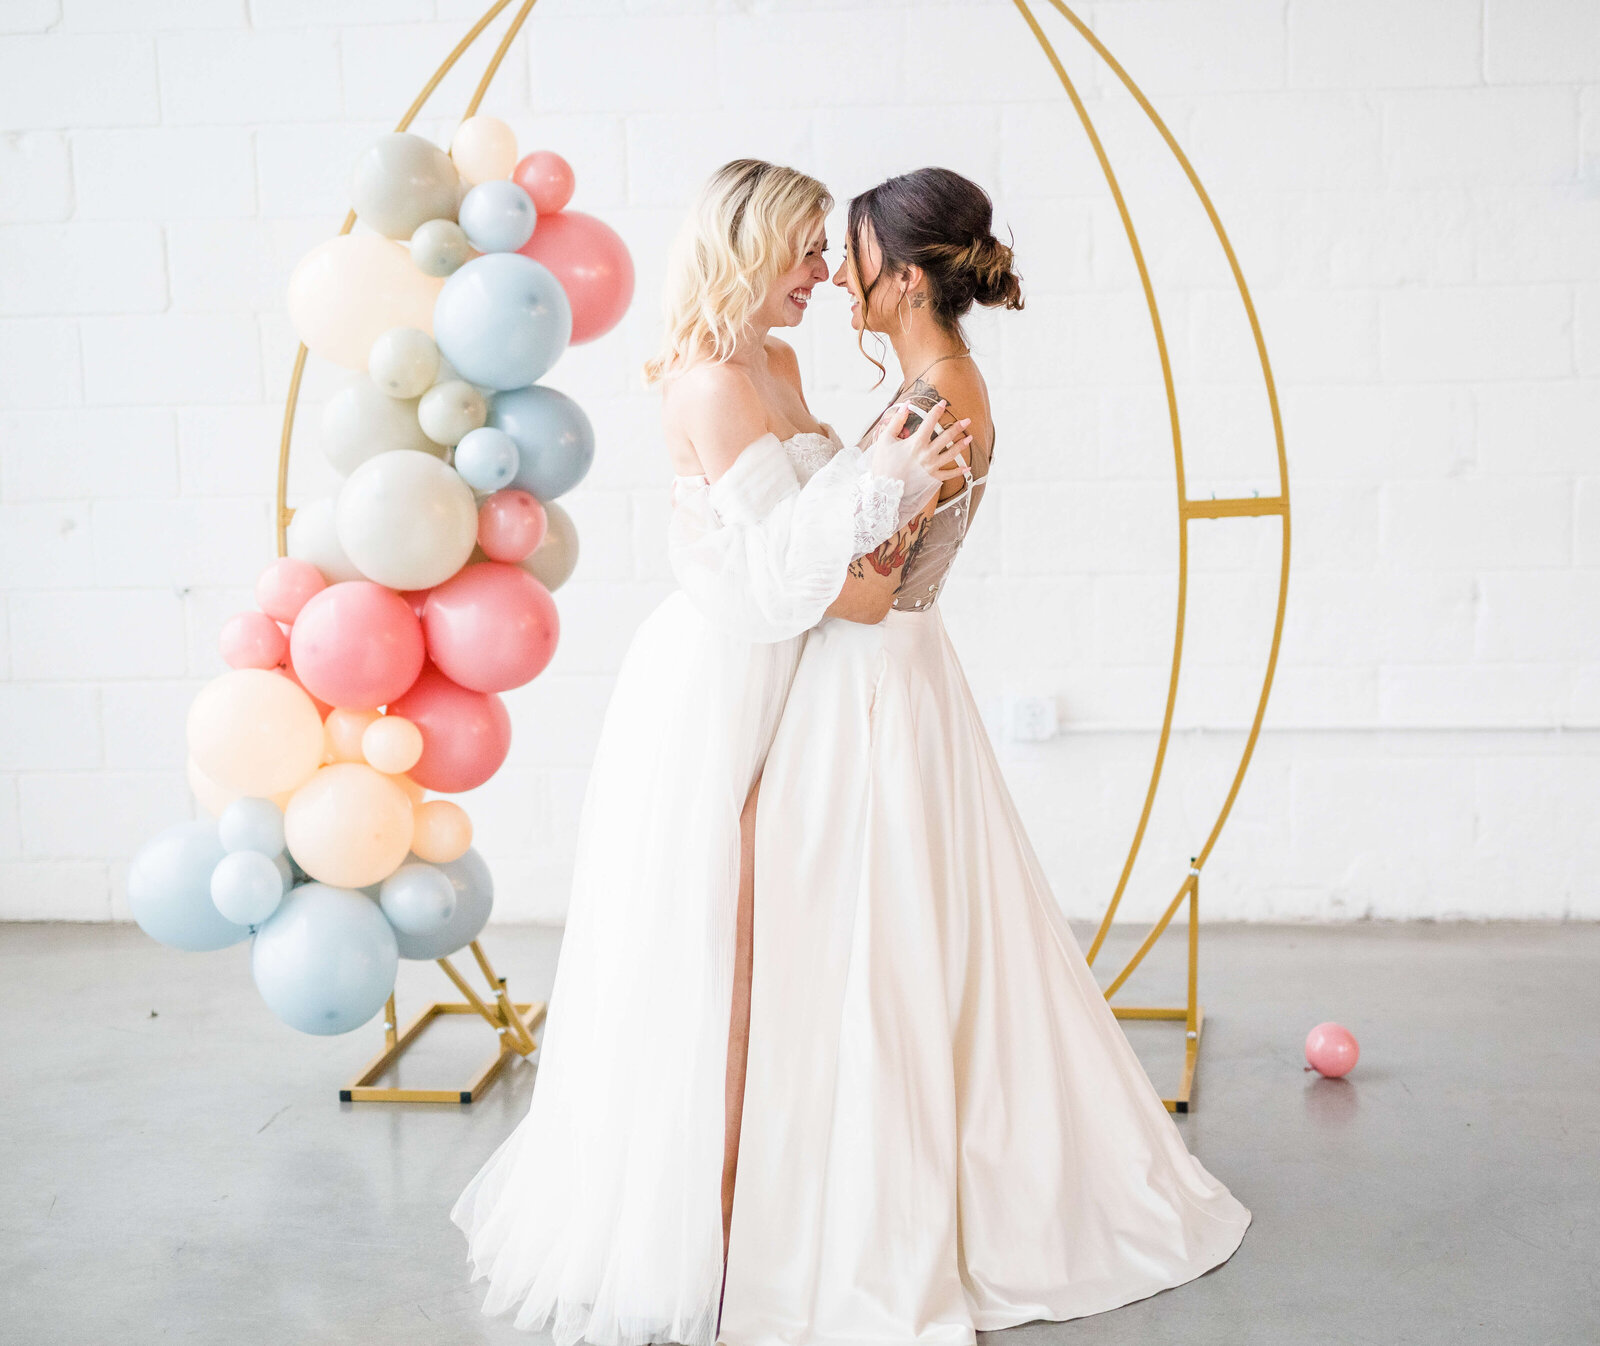 a bride and her bride hug each other on their wedding day in front of their balloon arch that is full of pastel colors